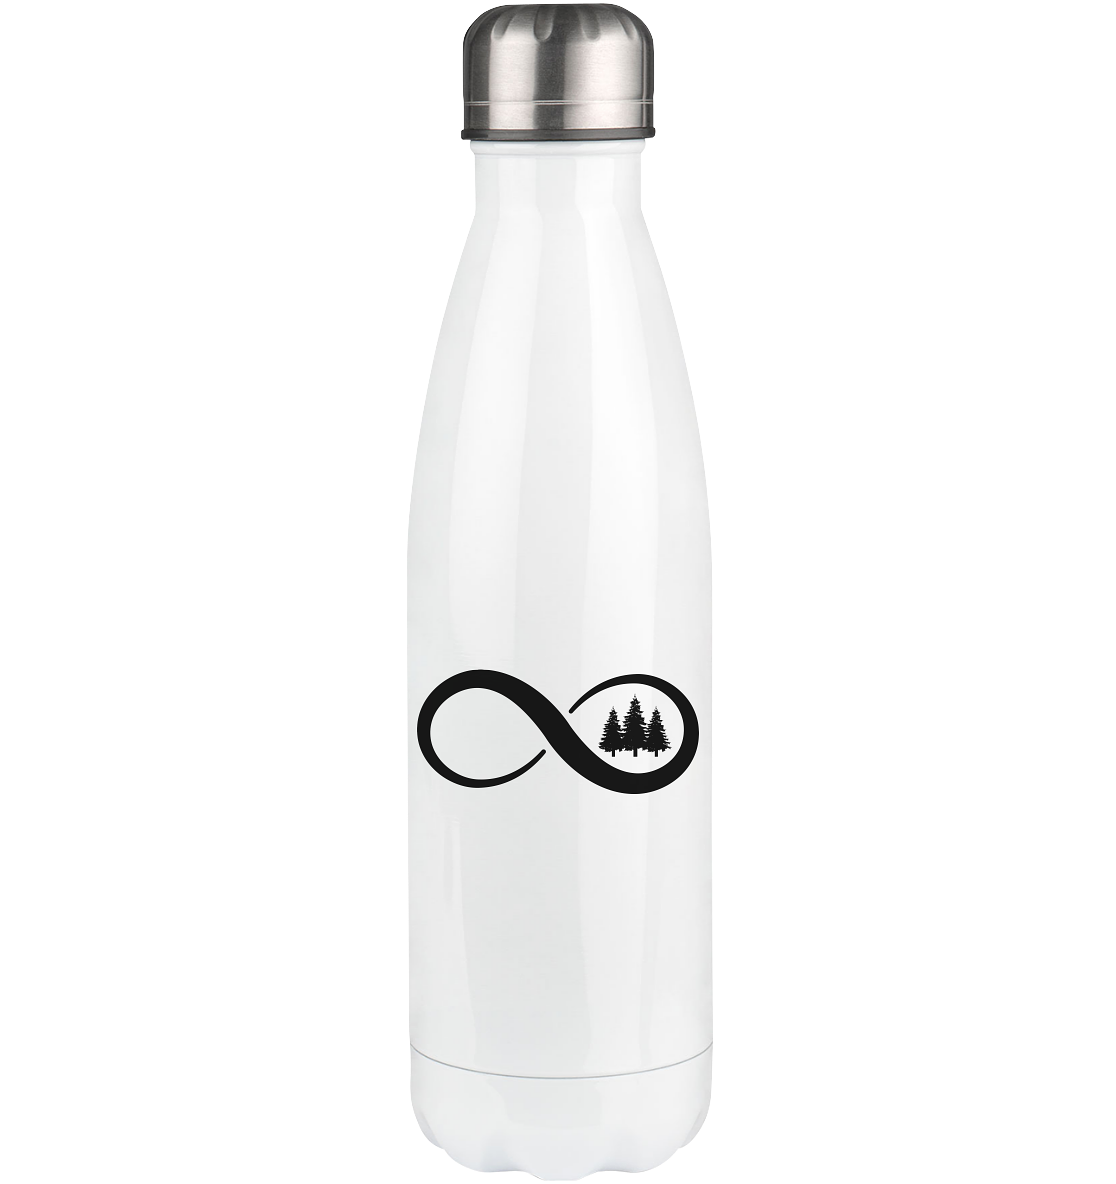 Infinity and Tree - Edelstahl Thermosflasche camping UONP 500ml